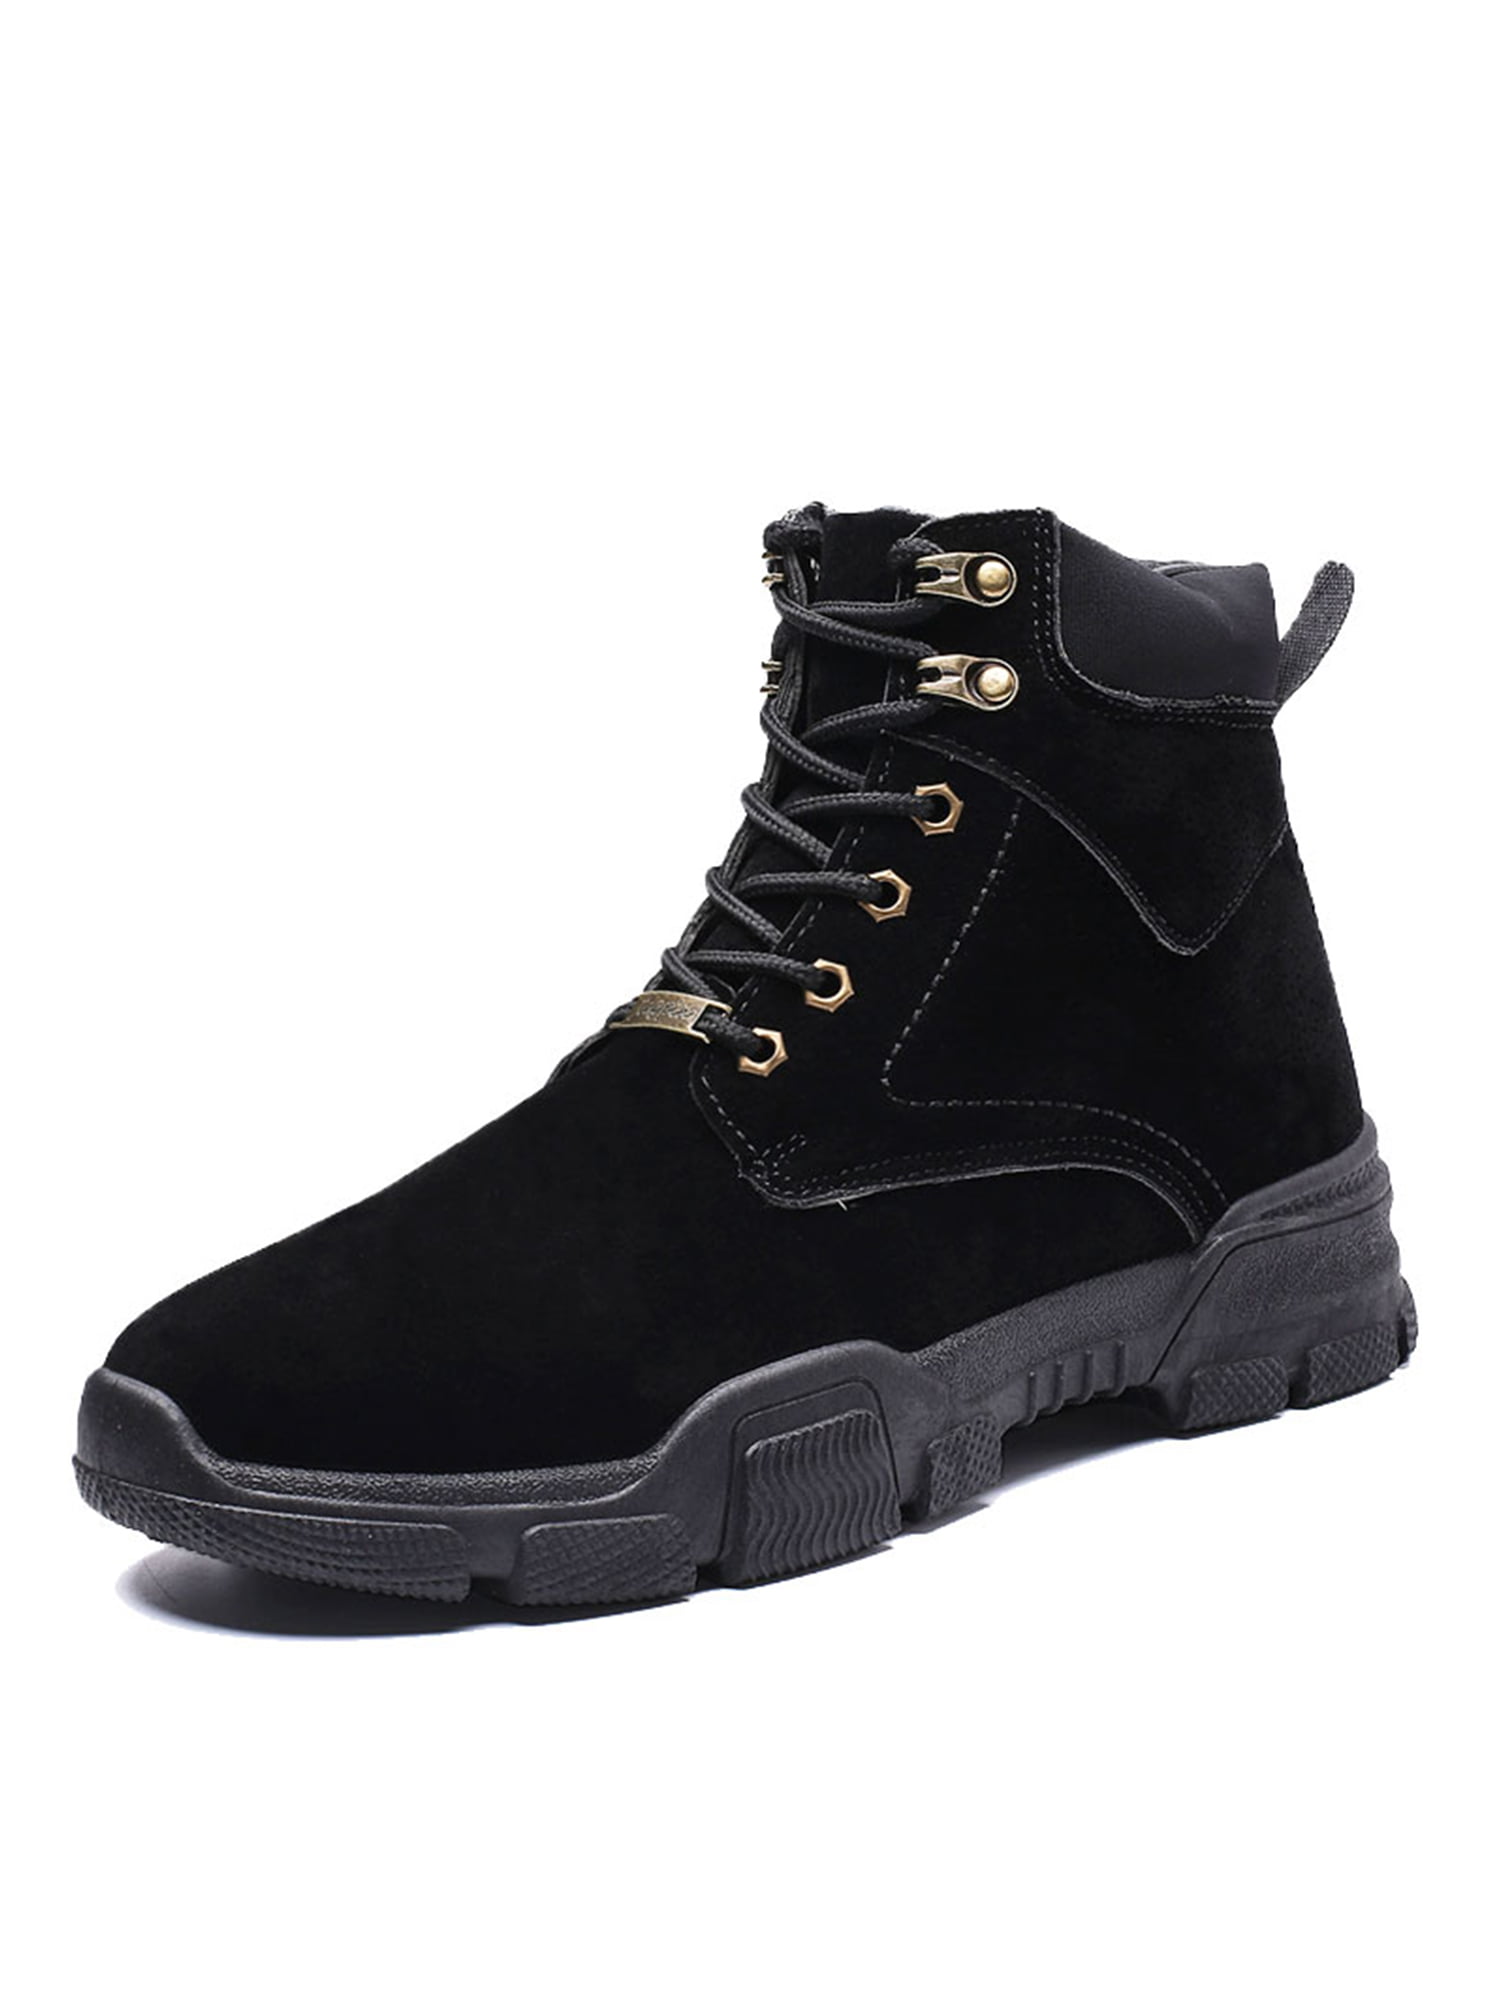 Mens Spring Martin Boots Casual Ankle High-top Shoes Outdoor Booties Anti-Slip Shoes 